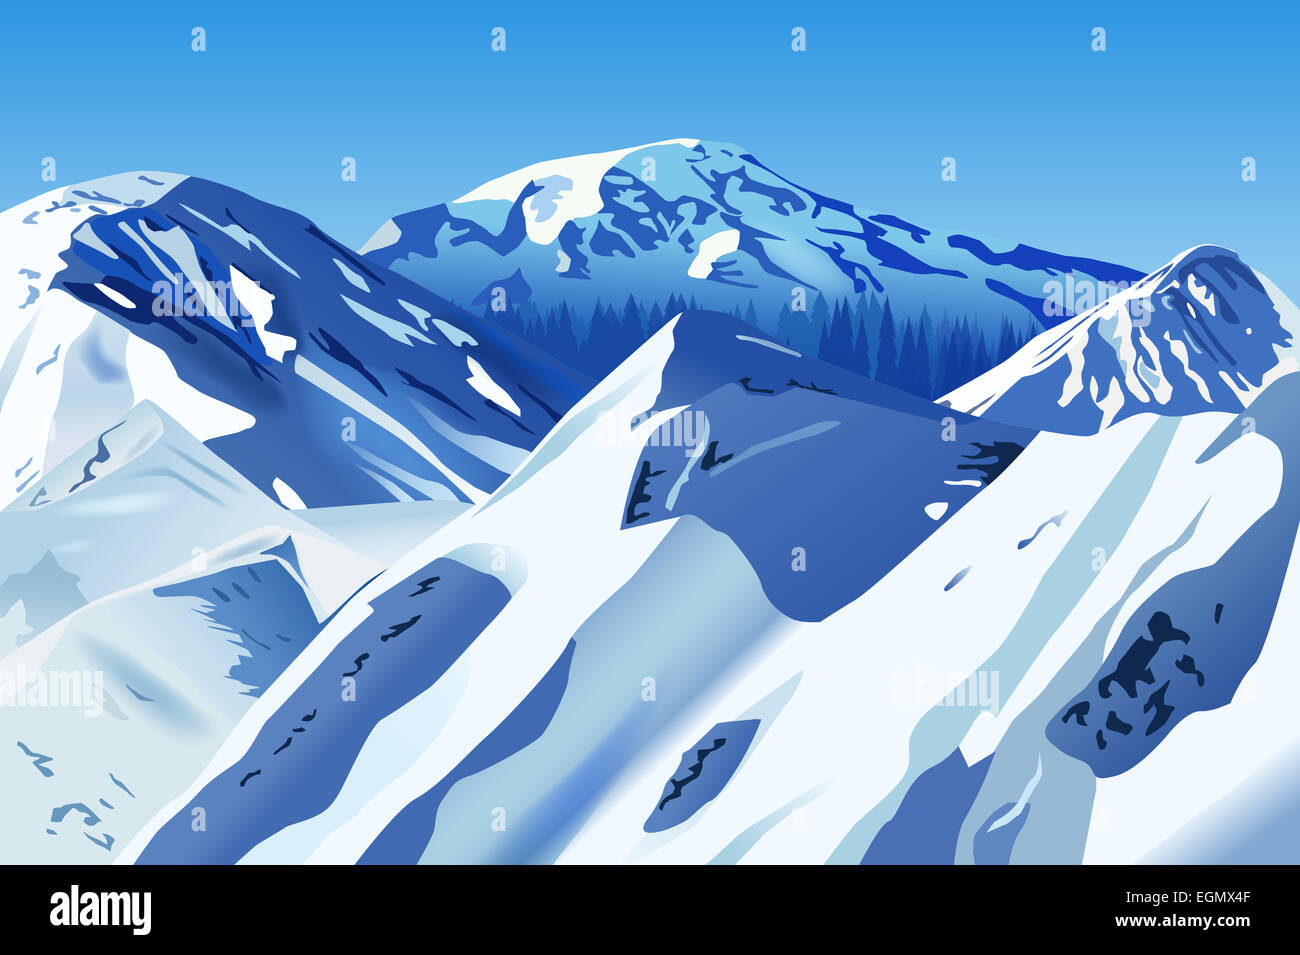 Snowy Mountains Raster Illustration Banque D'Images